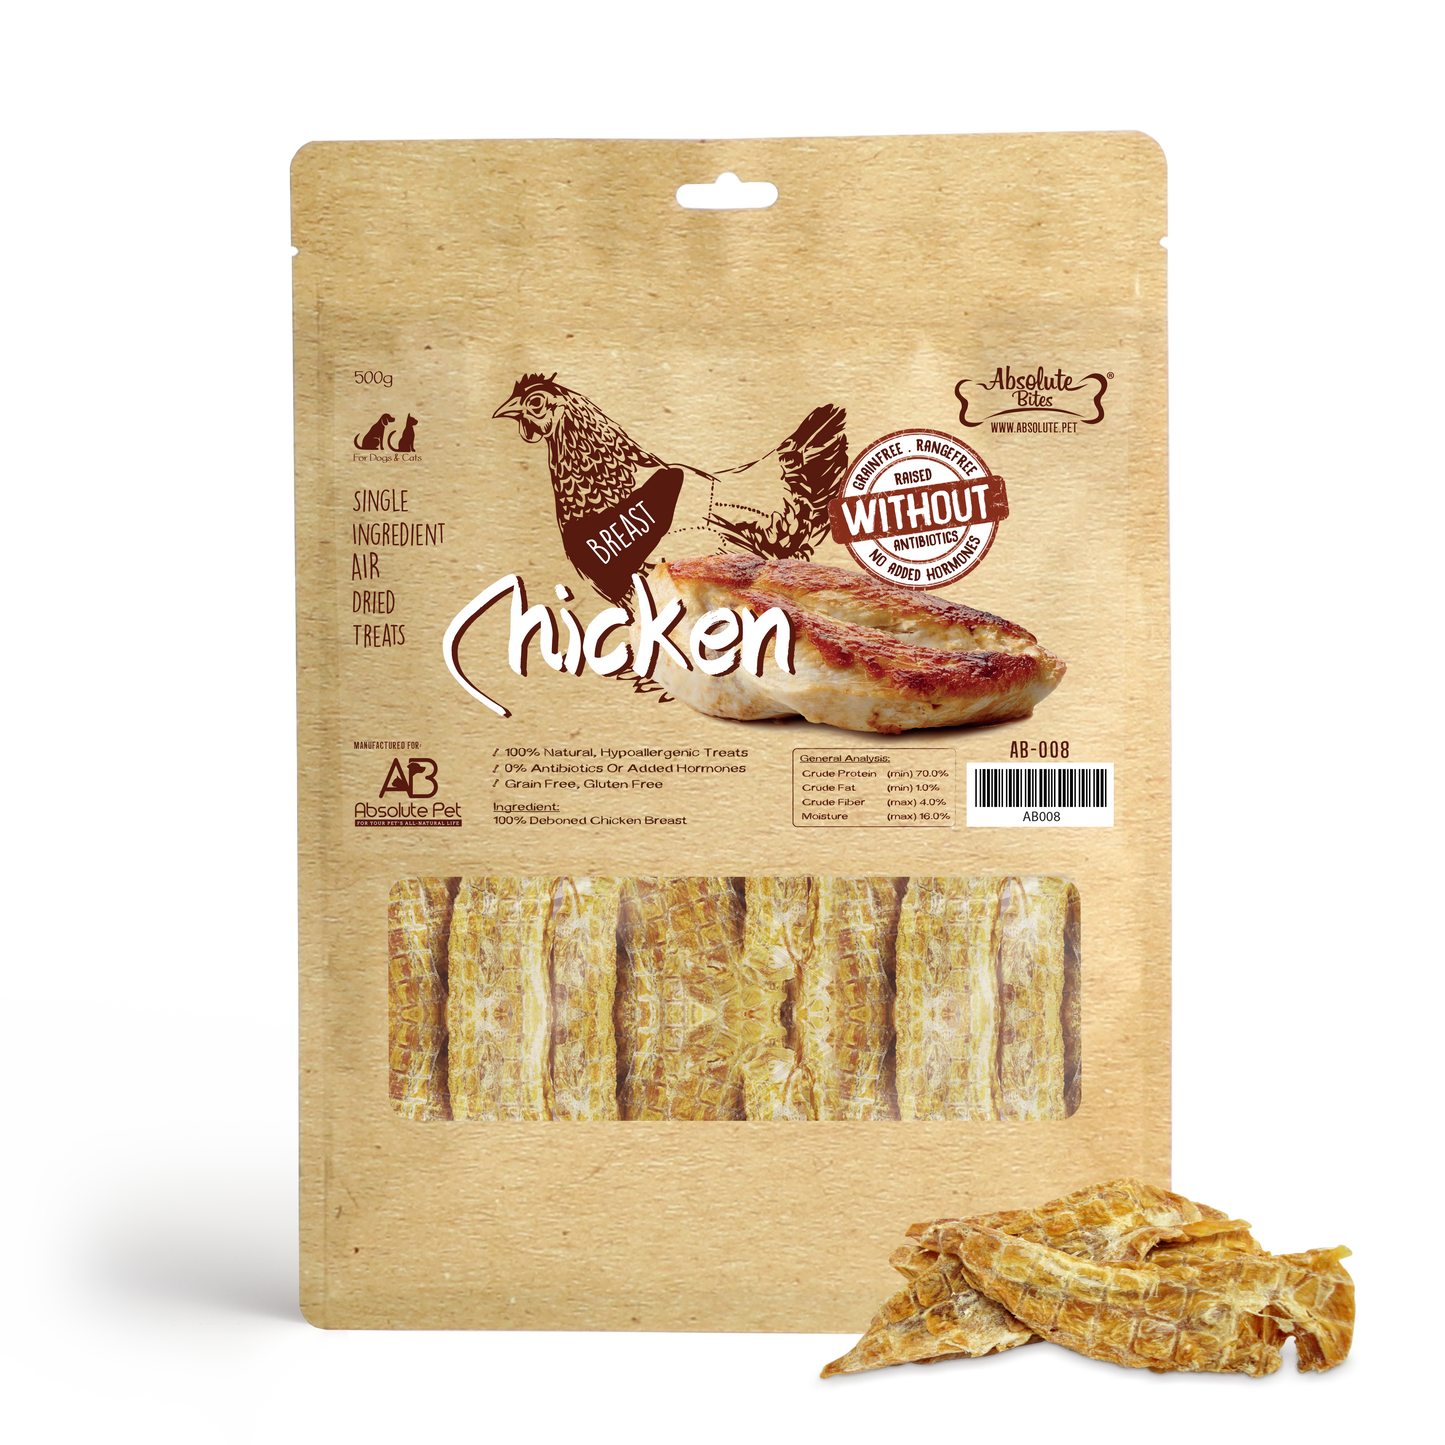 Absolute Bites Air Dried Chicken Breast Dog & Cat Treats (Large Bag) 500g